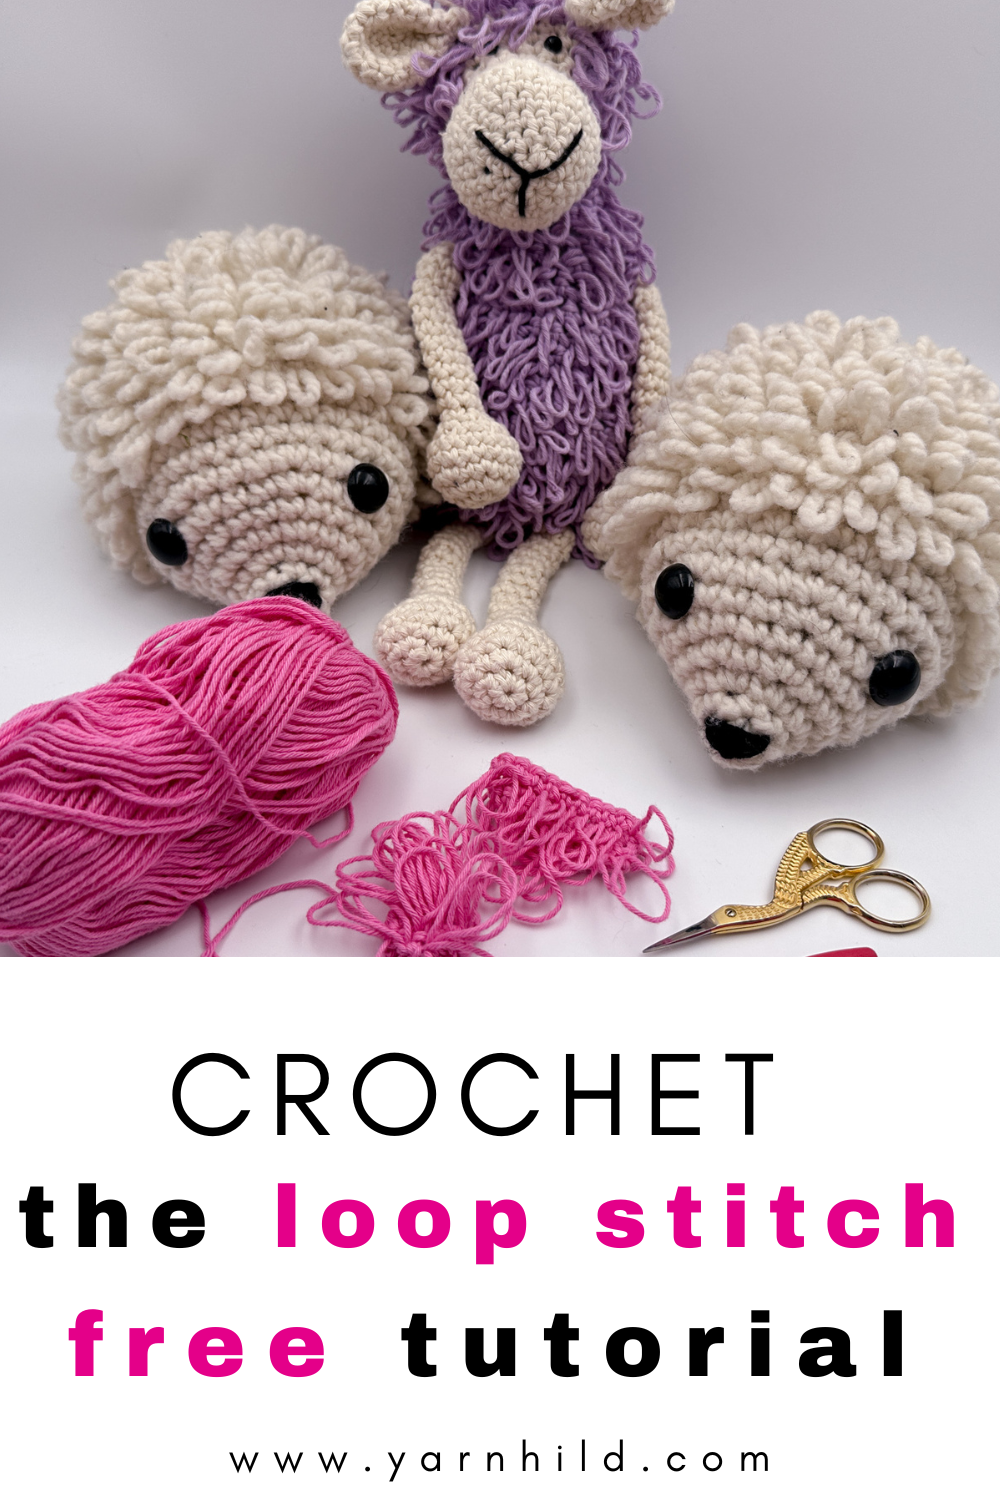 Tips for Crocheting with Faux Fur Yarn - The Loopy Lamb